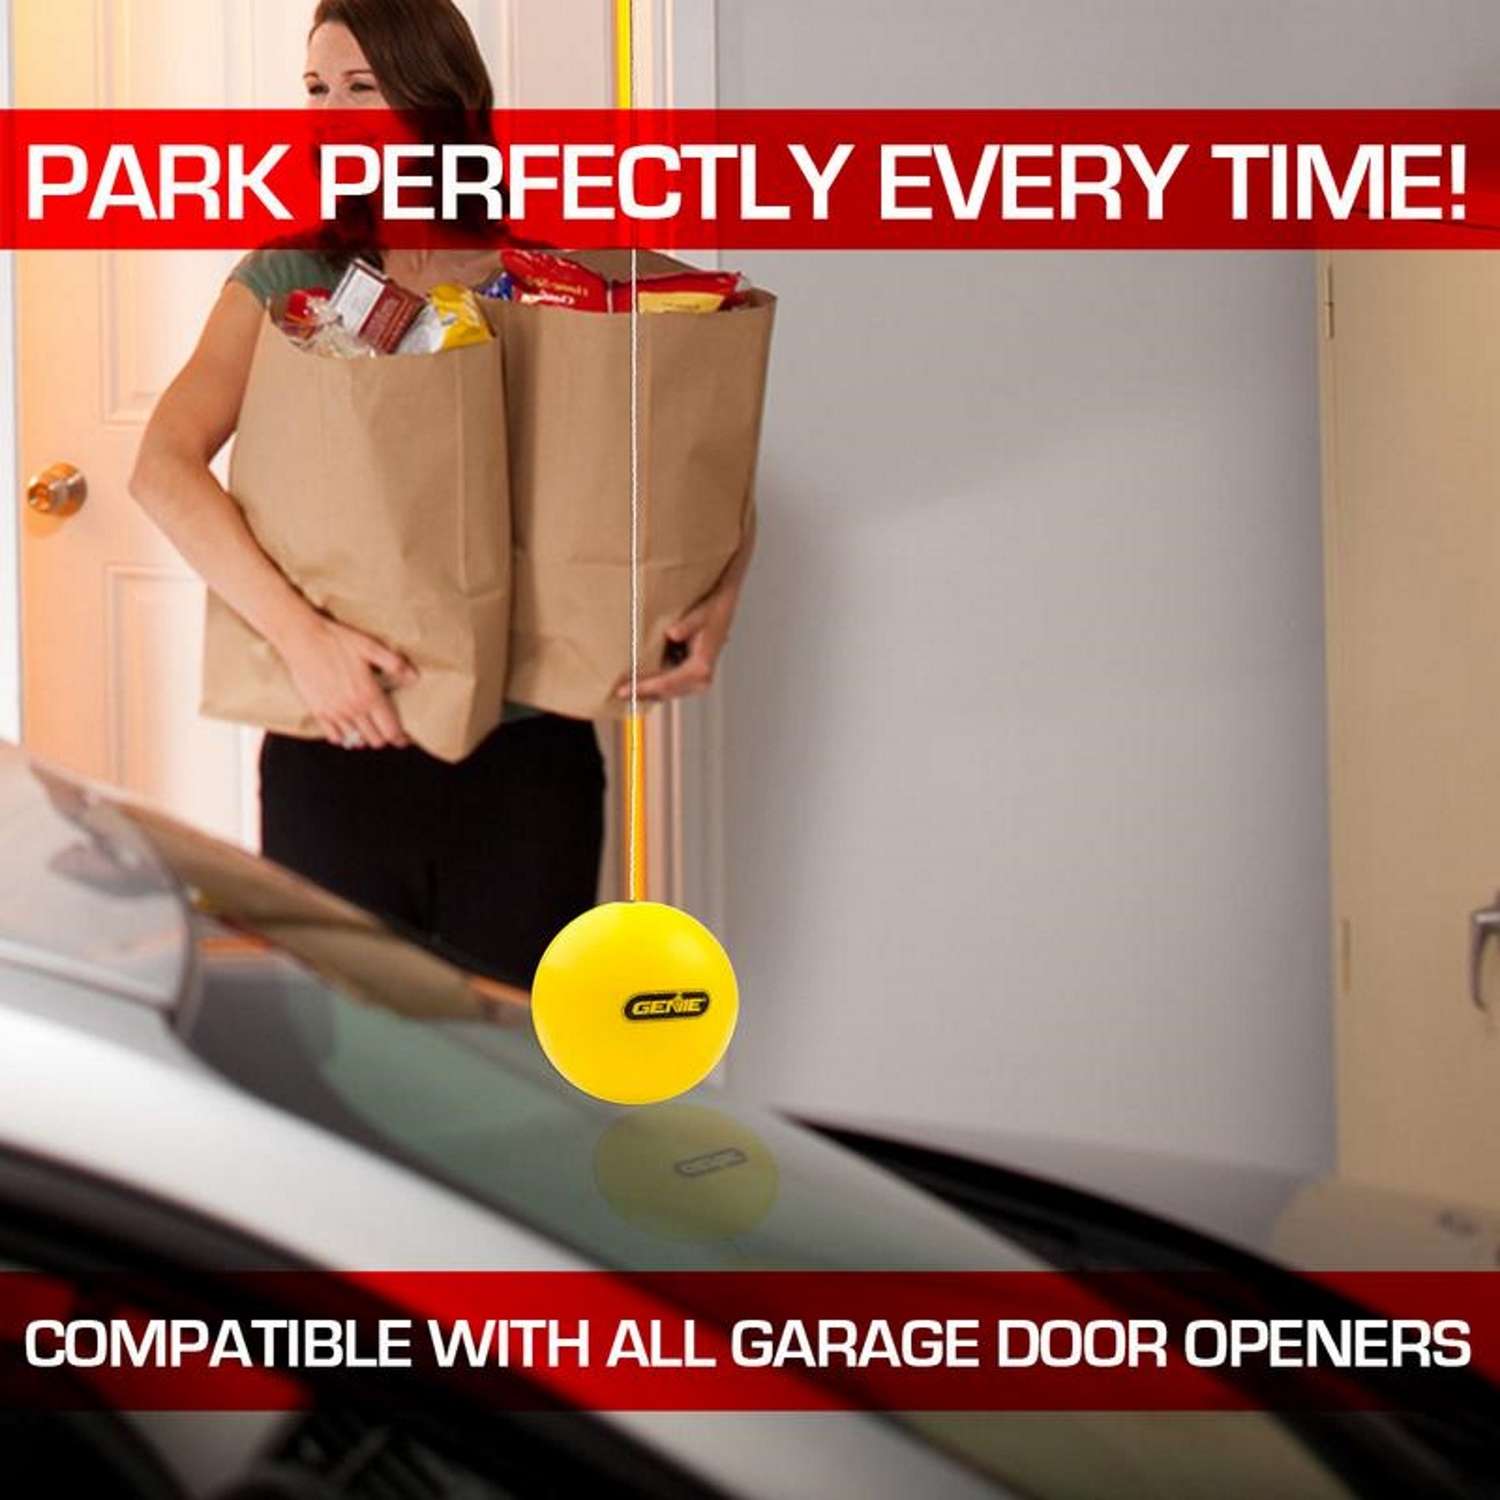 Genie Perfect Stop Yellow Parking Ball 1 pk - Ace Hardware